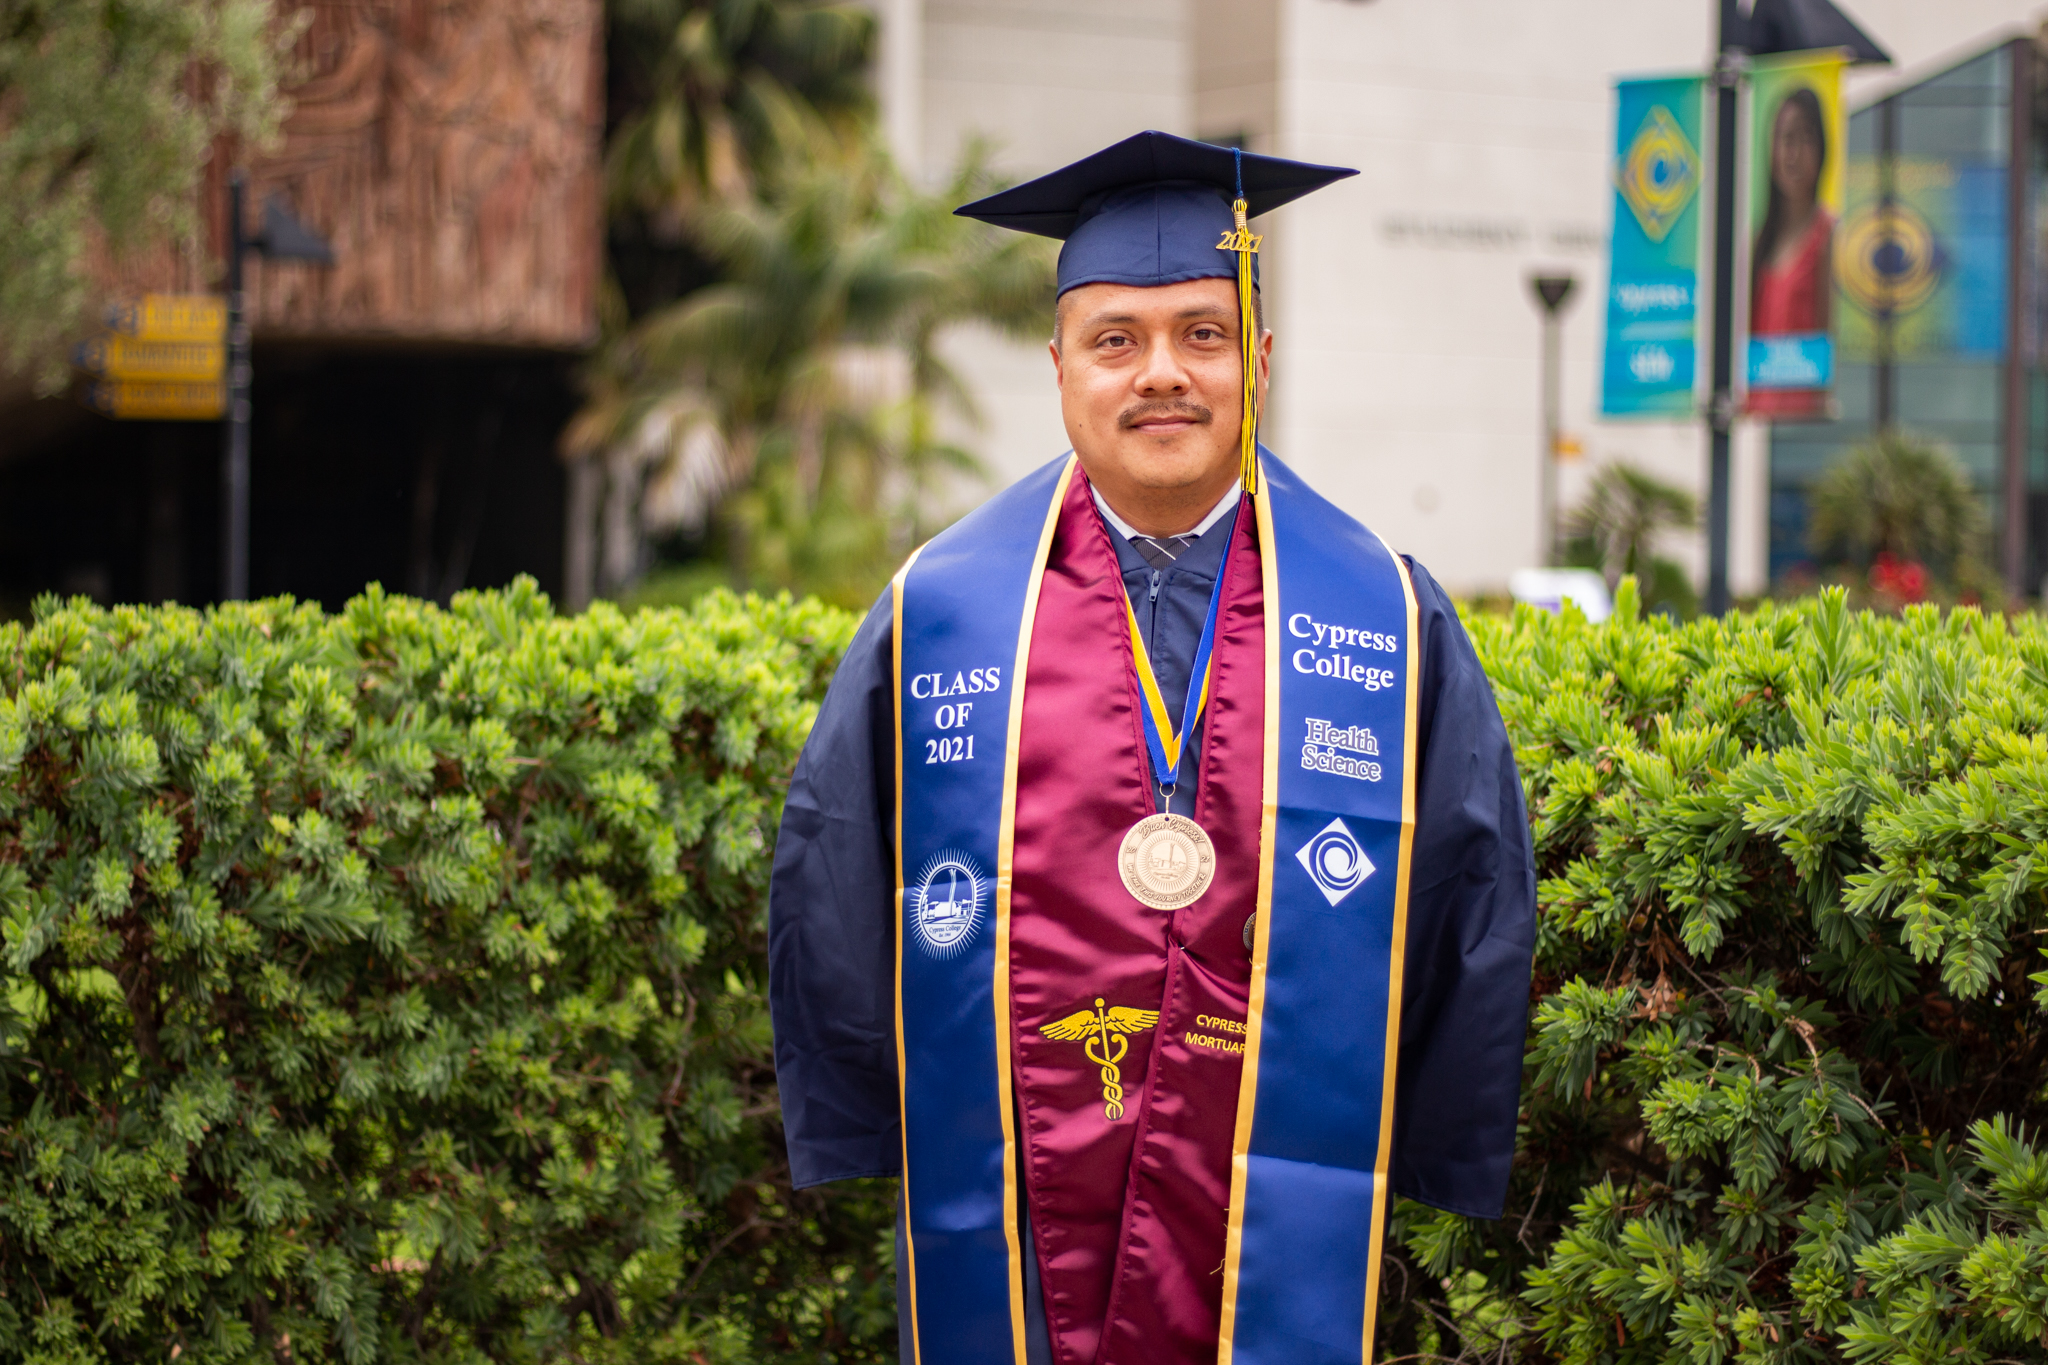 David Garcia wears graduation regalia in front of greenery on the Cypress College campus.